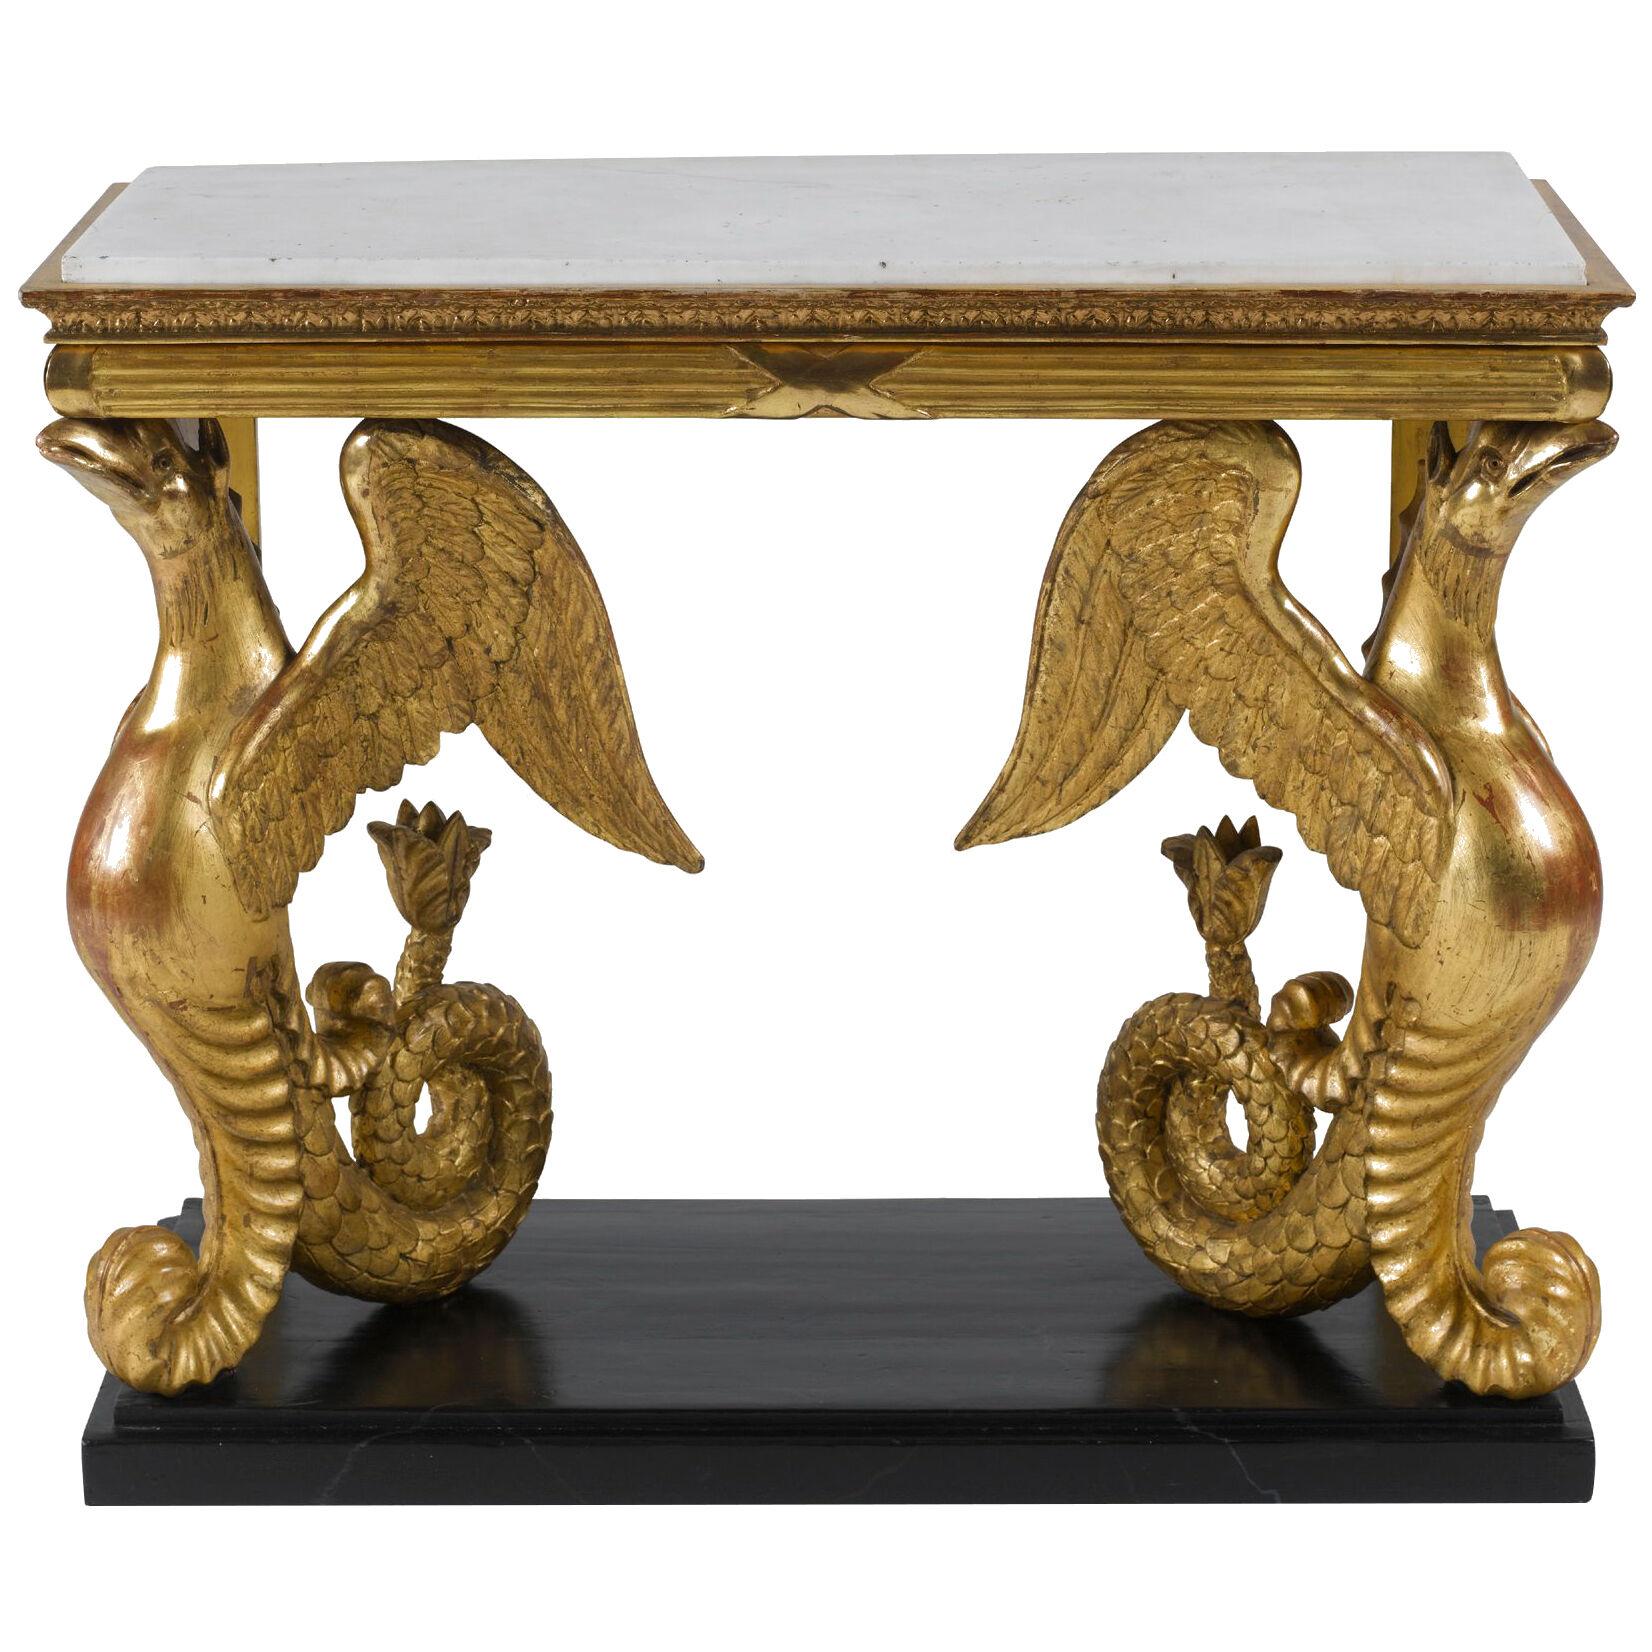 Unusual Early 19th Century Swedish Carved Giltwood Console Table